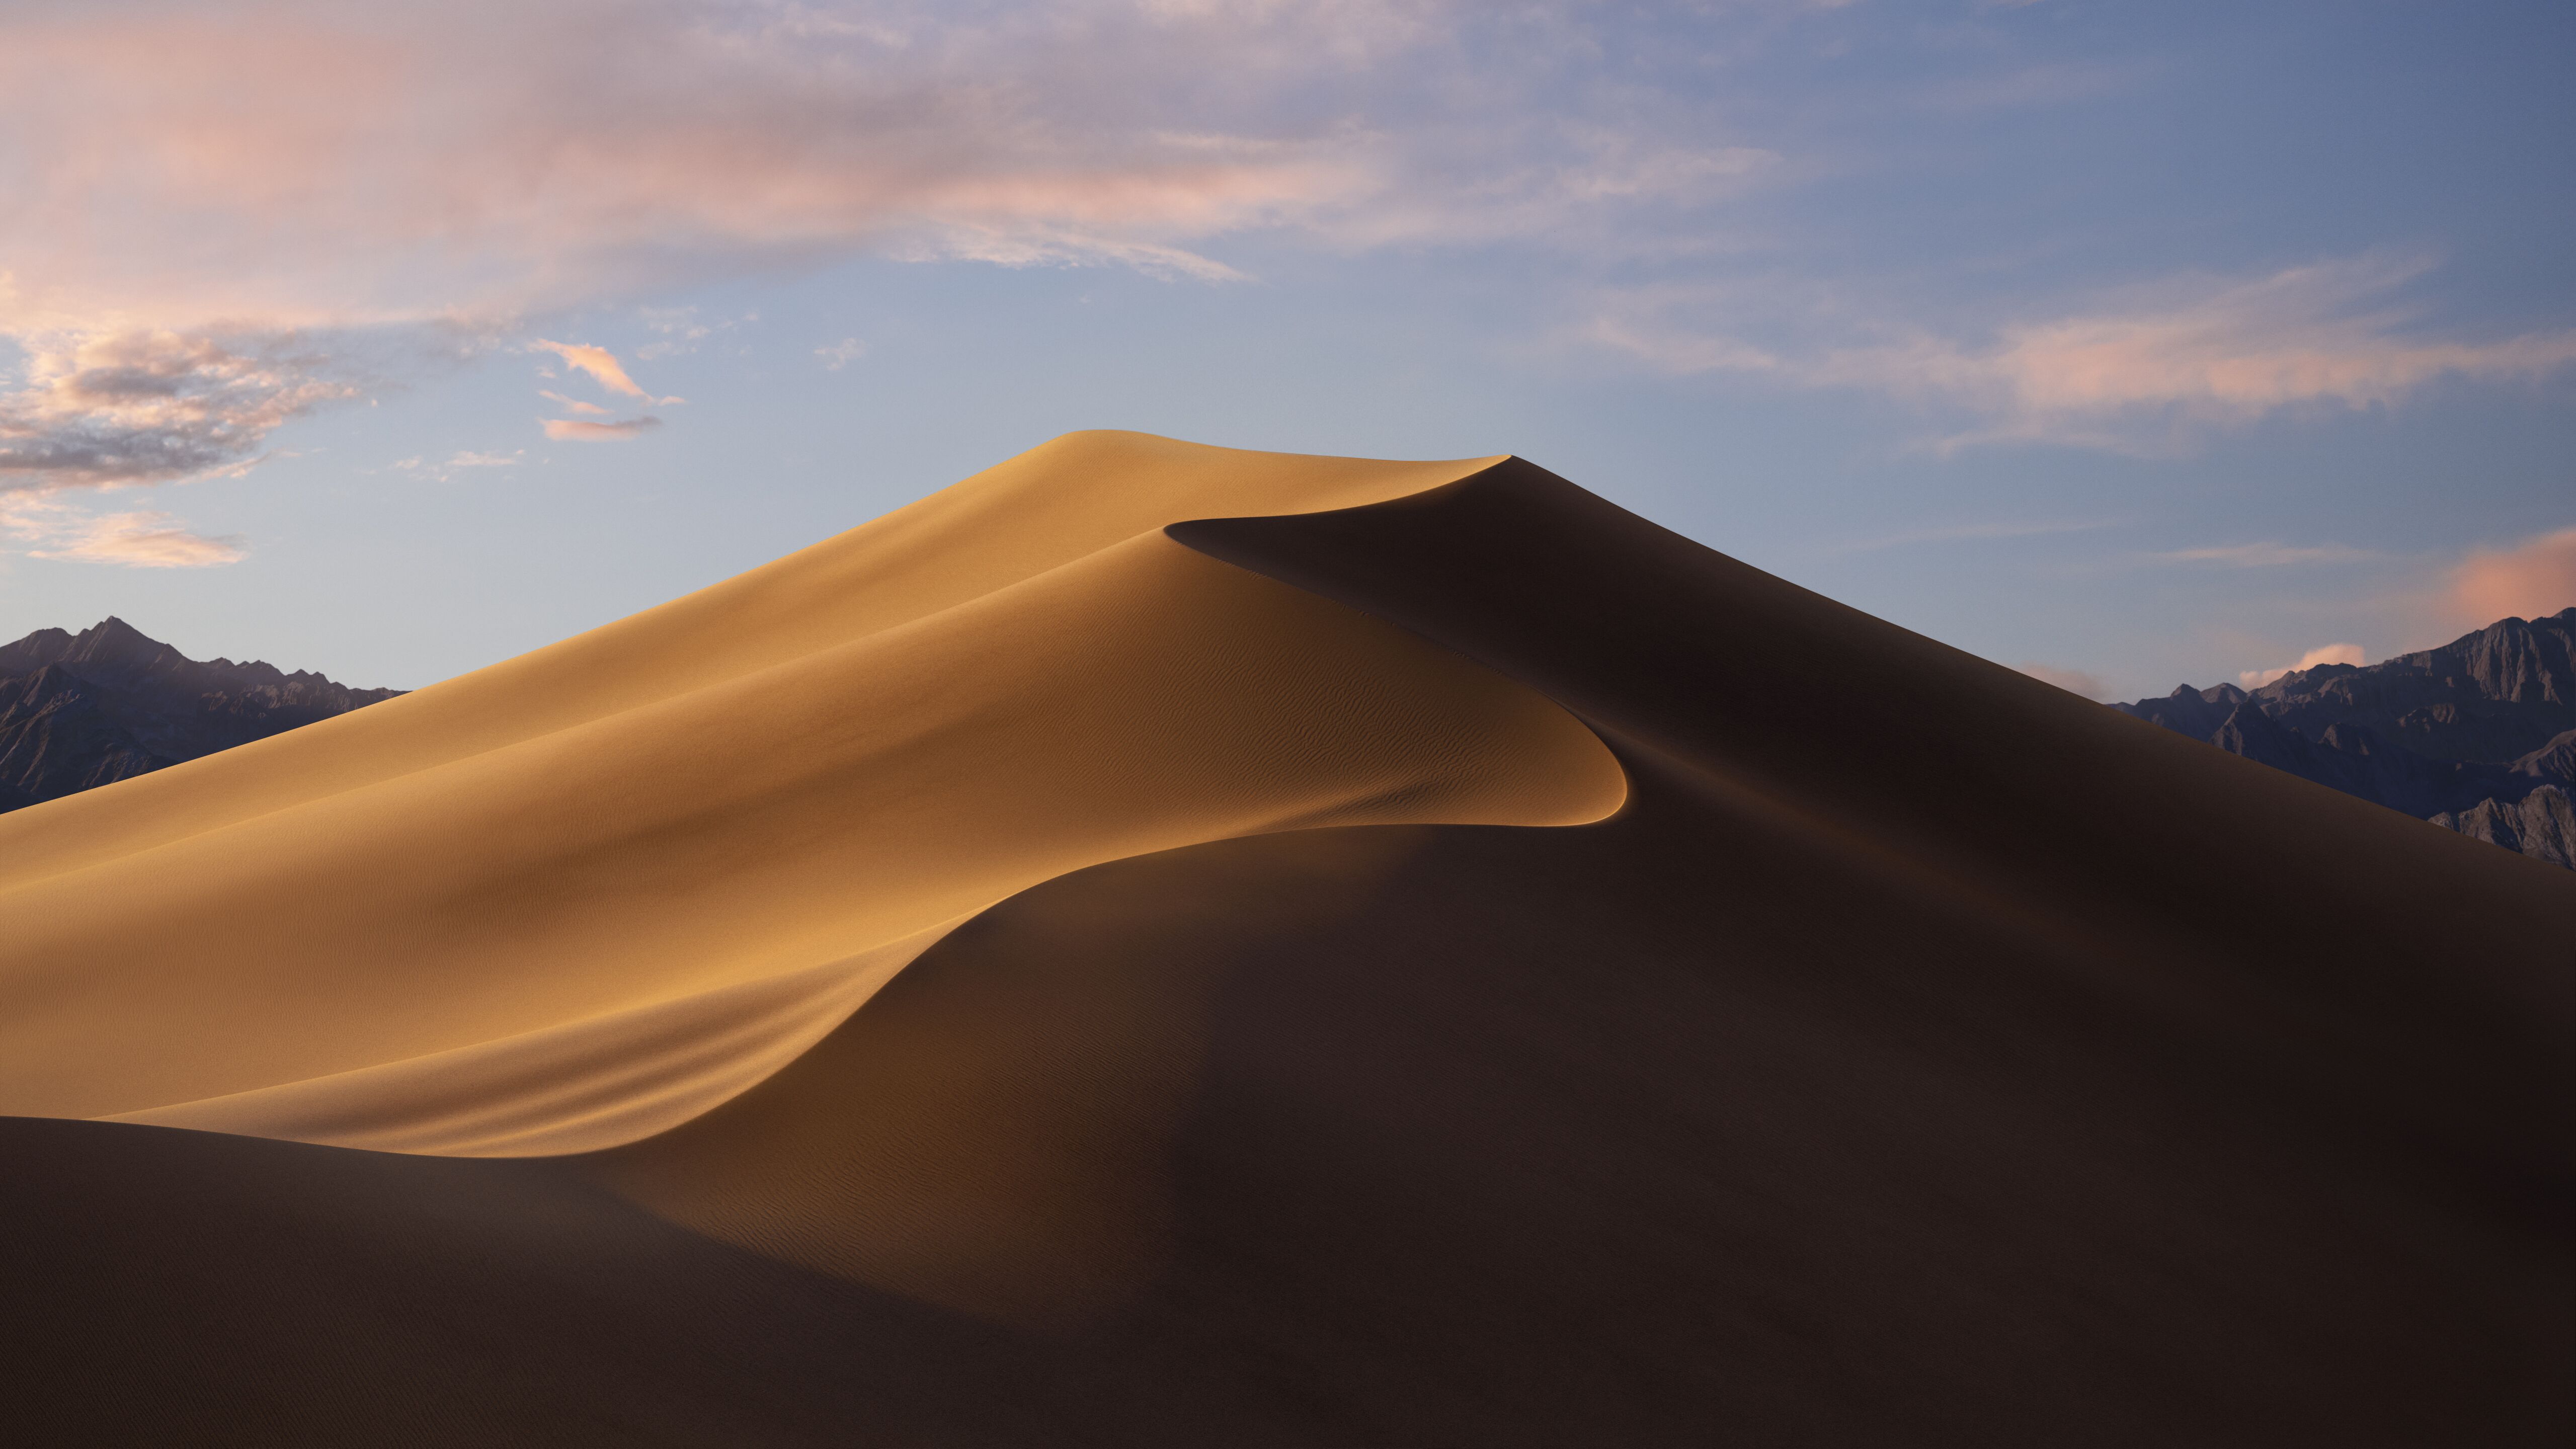 How to Get Apple macOS Mojave Wallpaper Right Now!